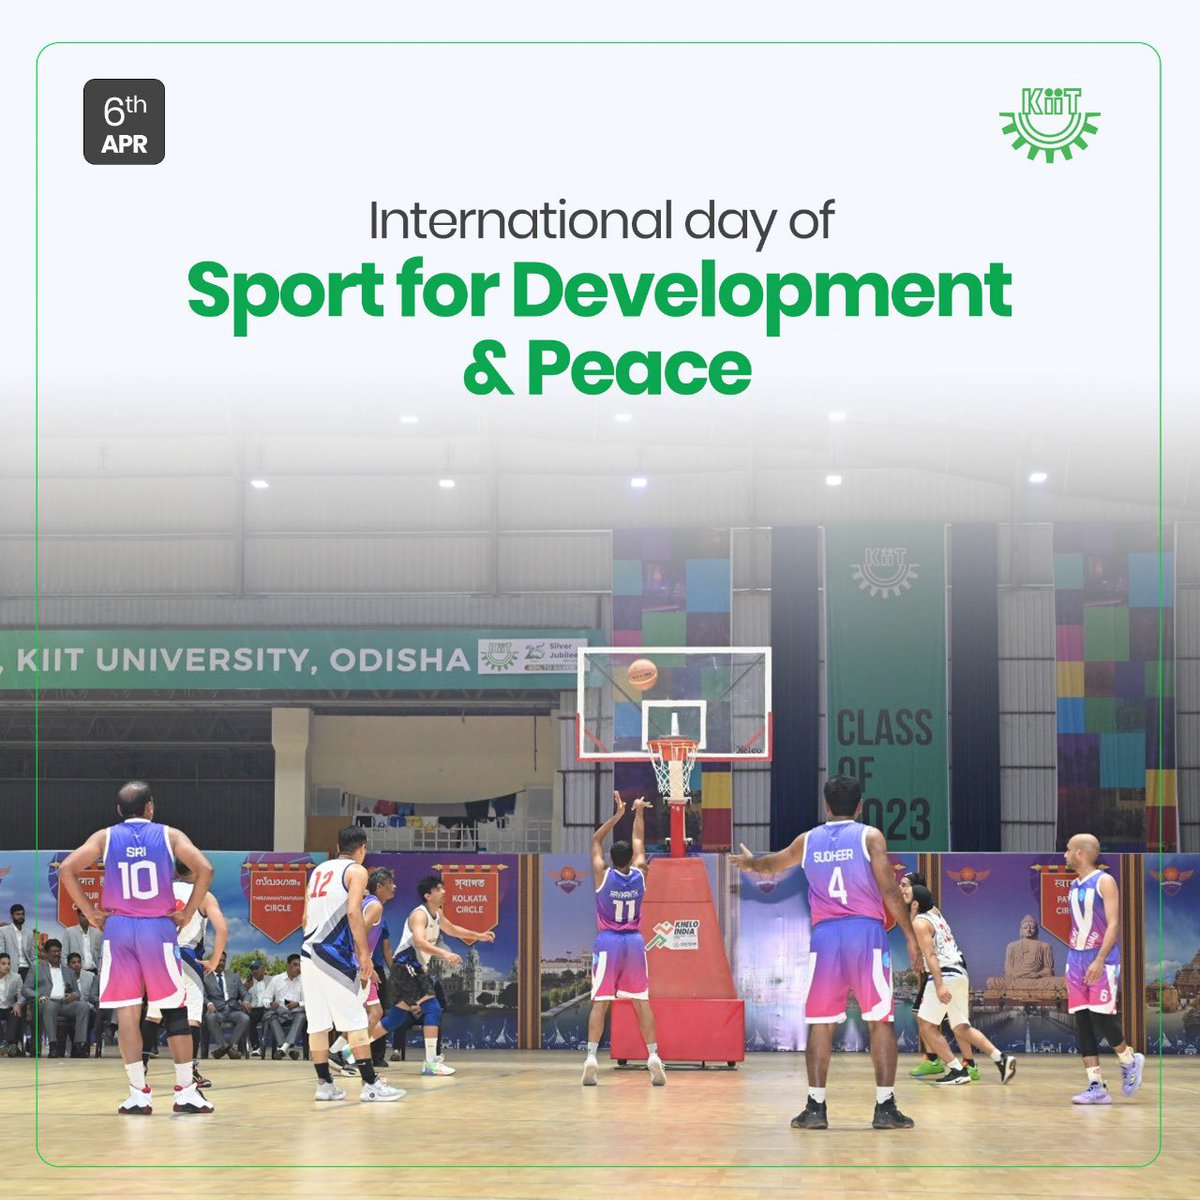 #KIIT celebrates the unifying influence of sports on the International Day of Sport for Development and Peace. We acknowledge sports as a catalyst for empowerment, unity, and peace. Let’s harness its potential to foster positive change in communities globally.